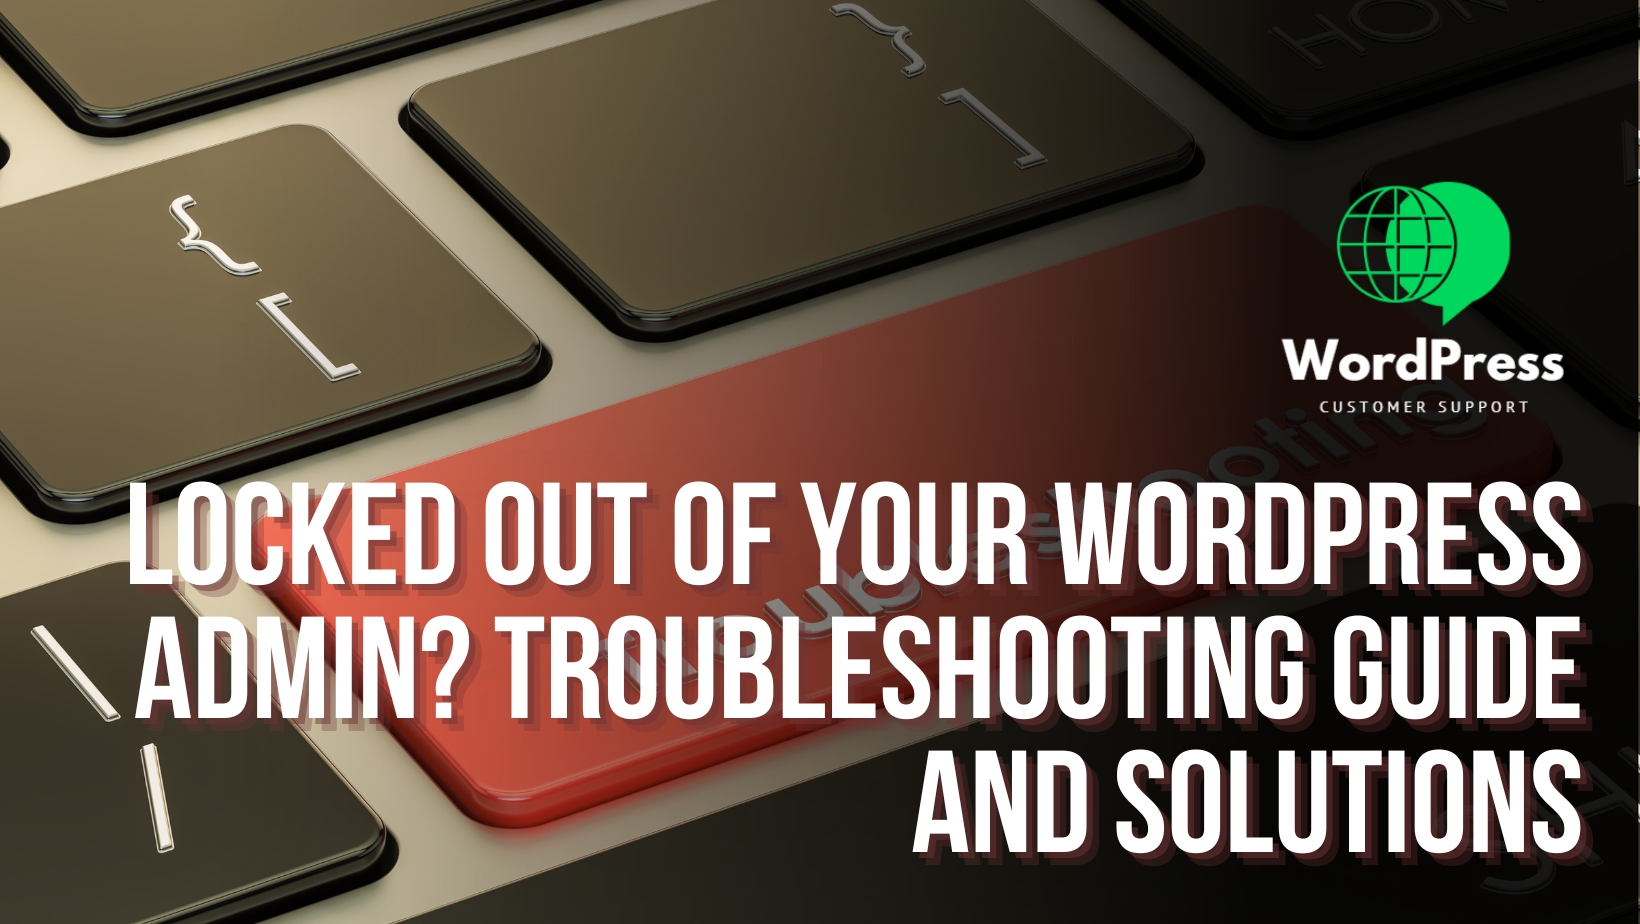 Locked Out of Your WordPress Admin? Troubleshooting Guide and Solutions